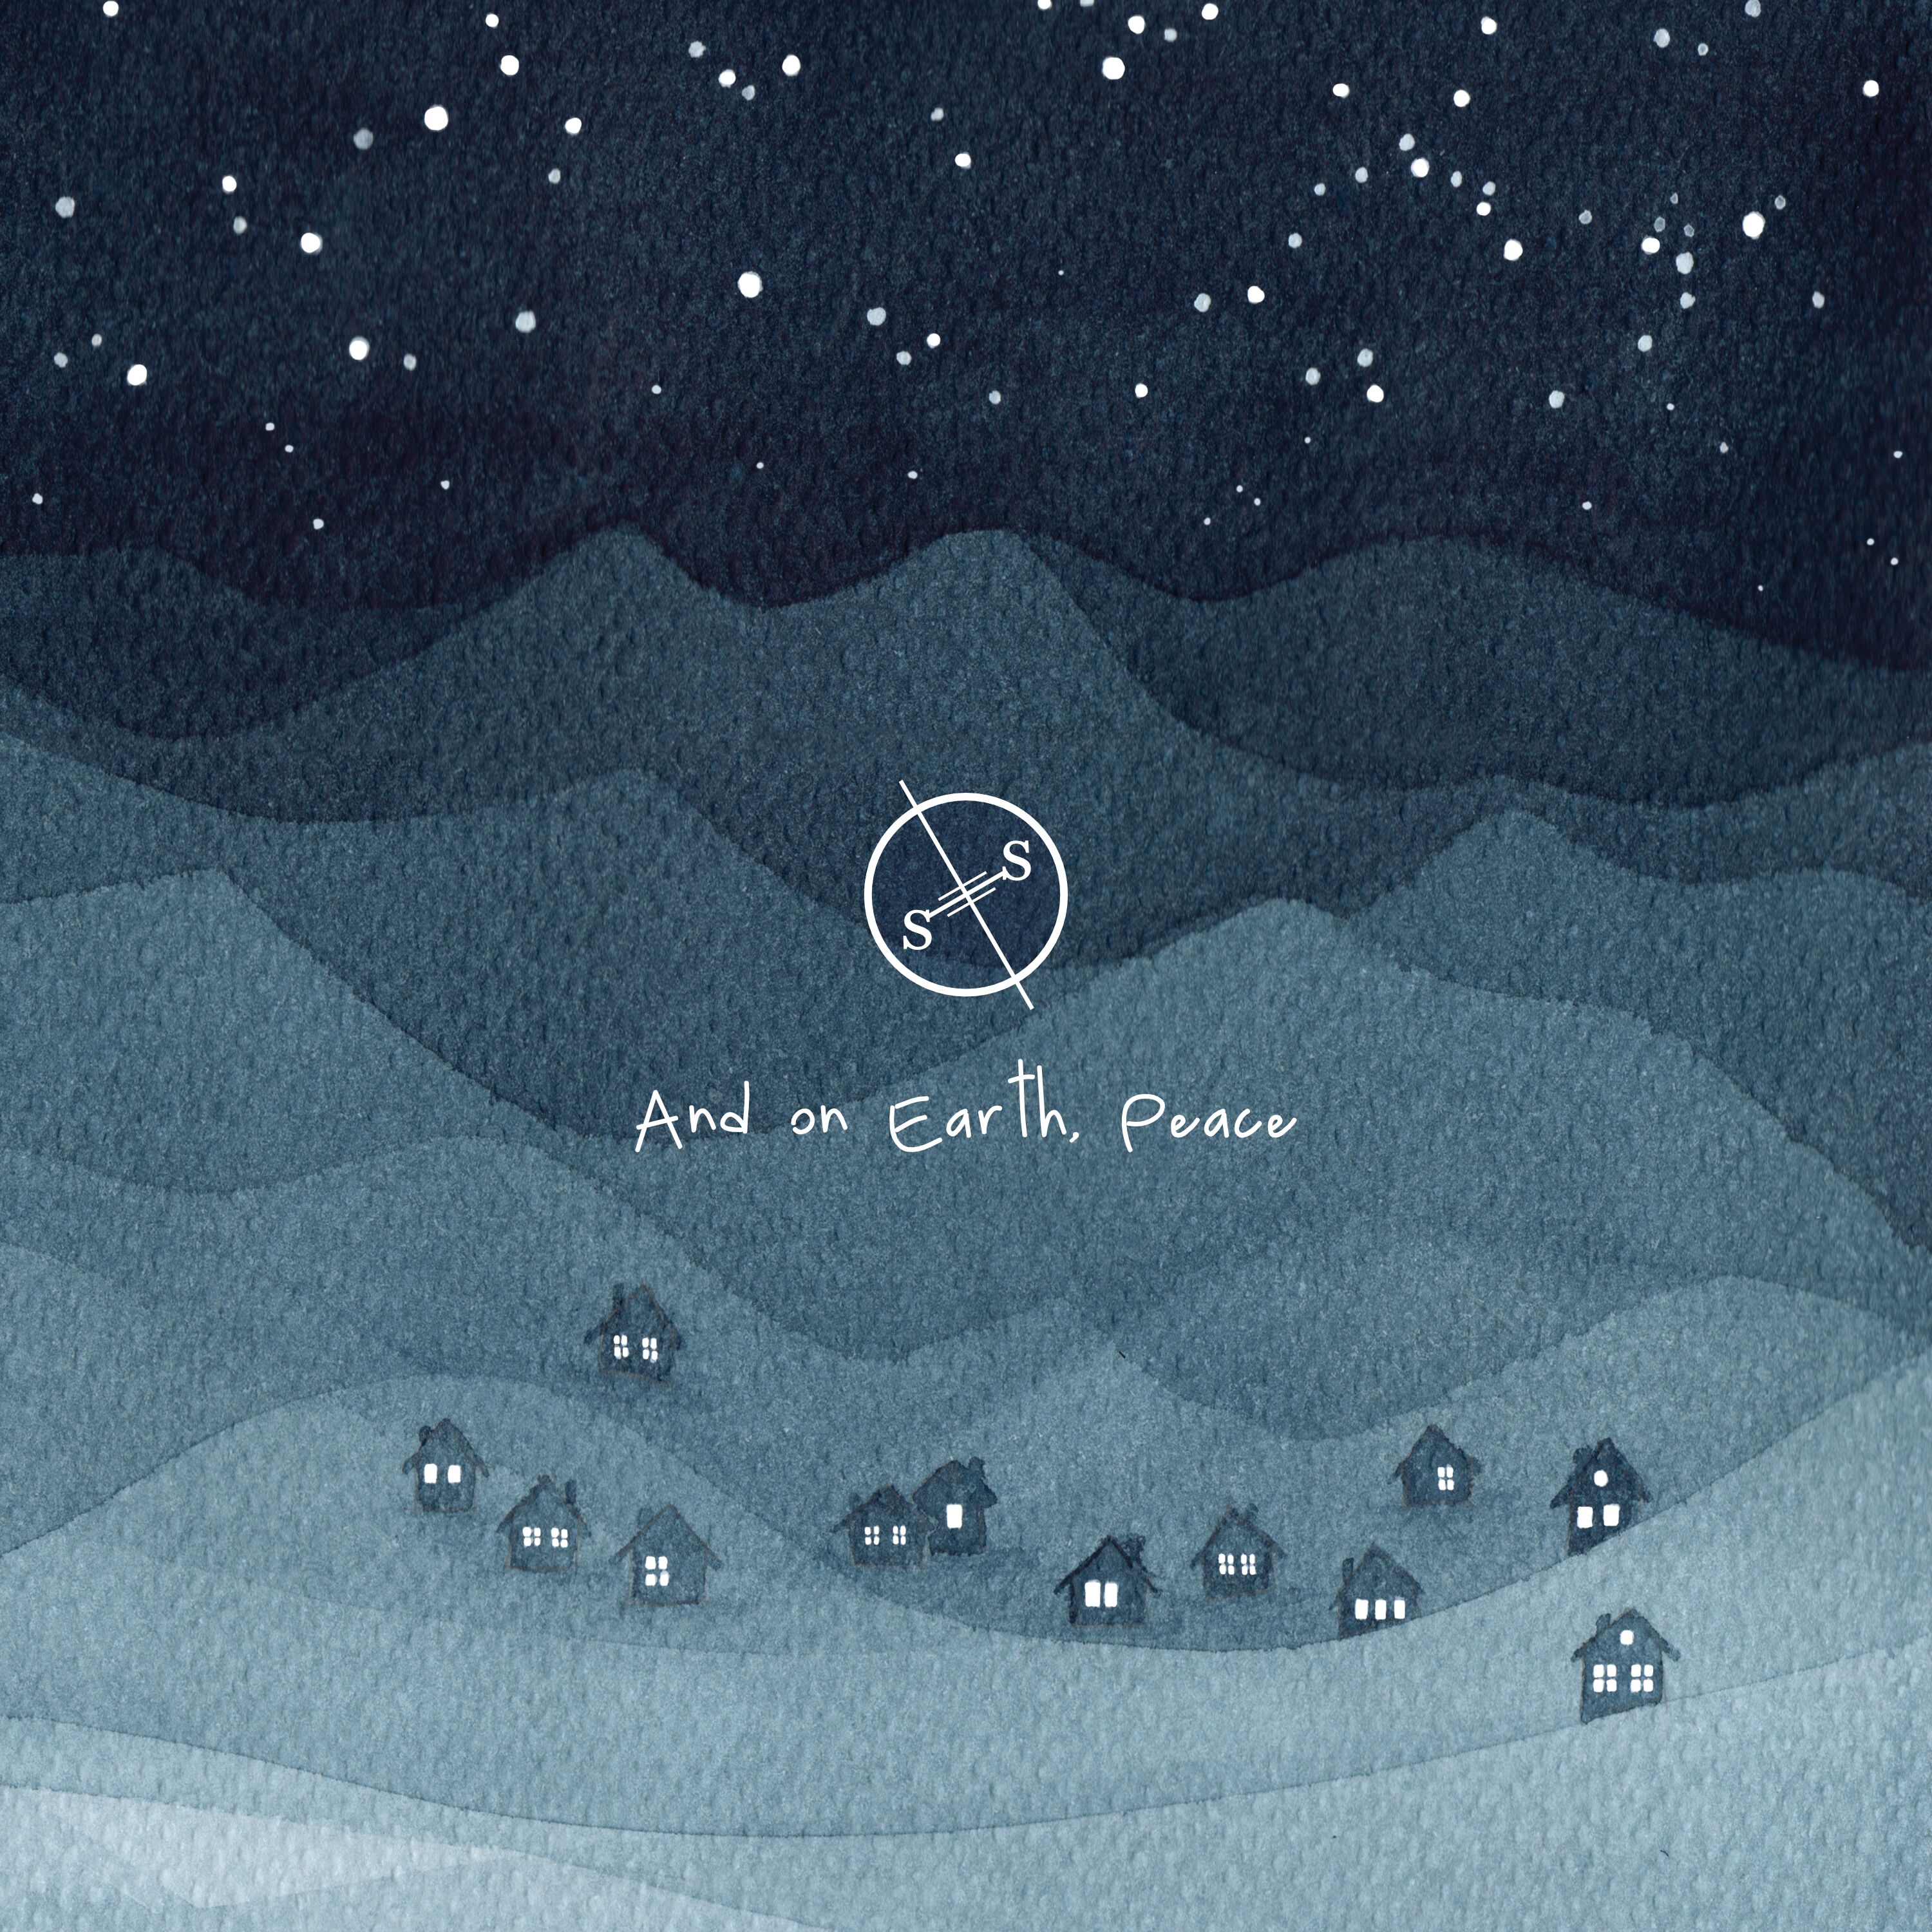 Salt Of The Sound Releasing New Christmas-Themed Ambient Album 'And on Earth, Peace'